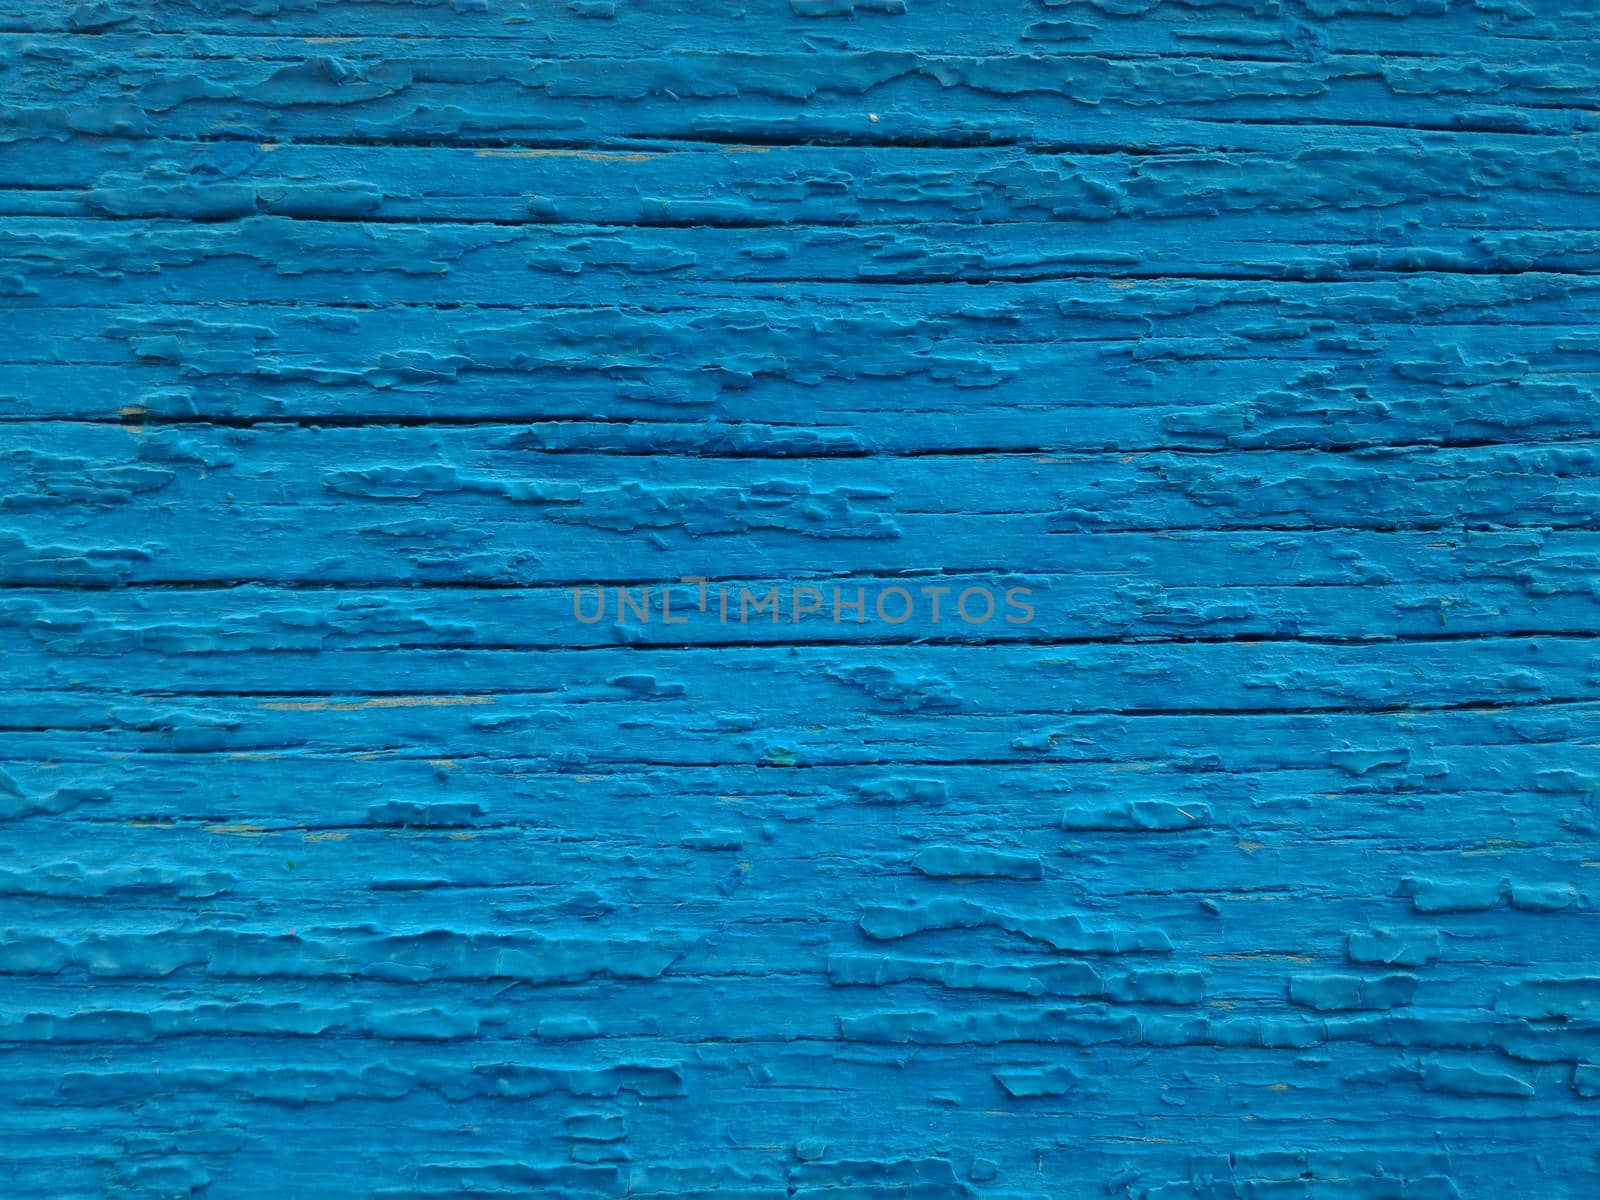 Texture of old paint on the wooden surface. Background of cracked blue paint, close-up